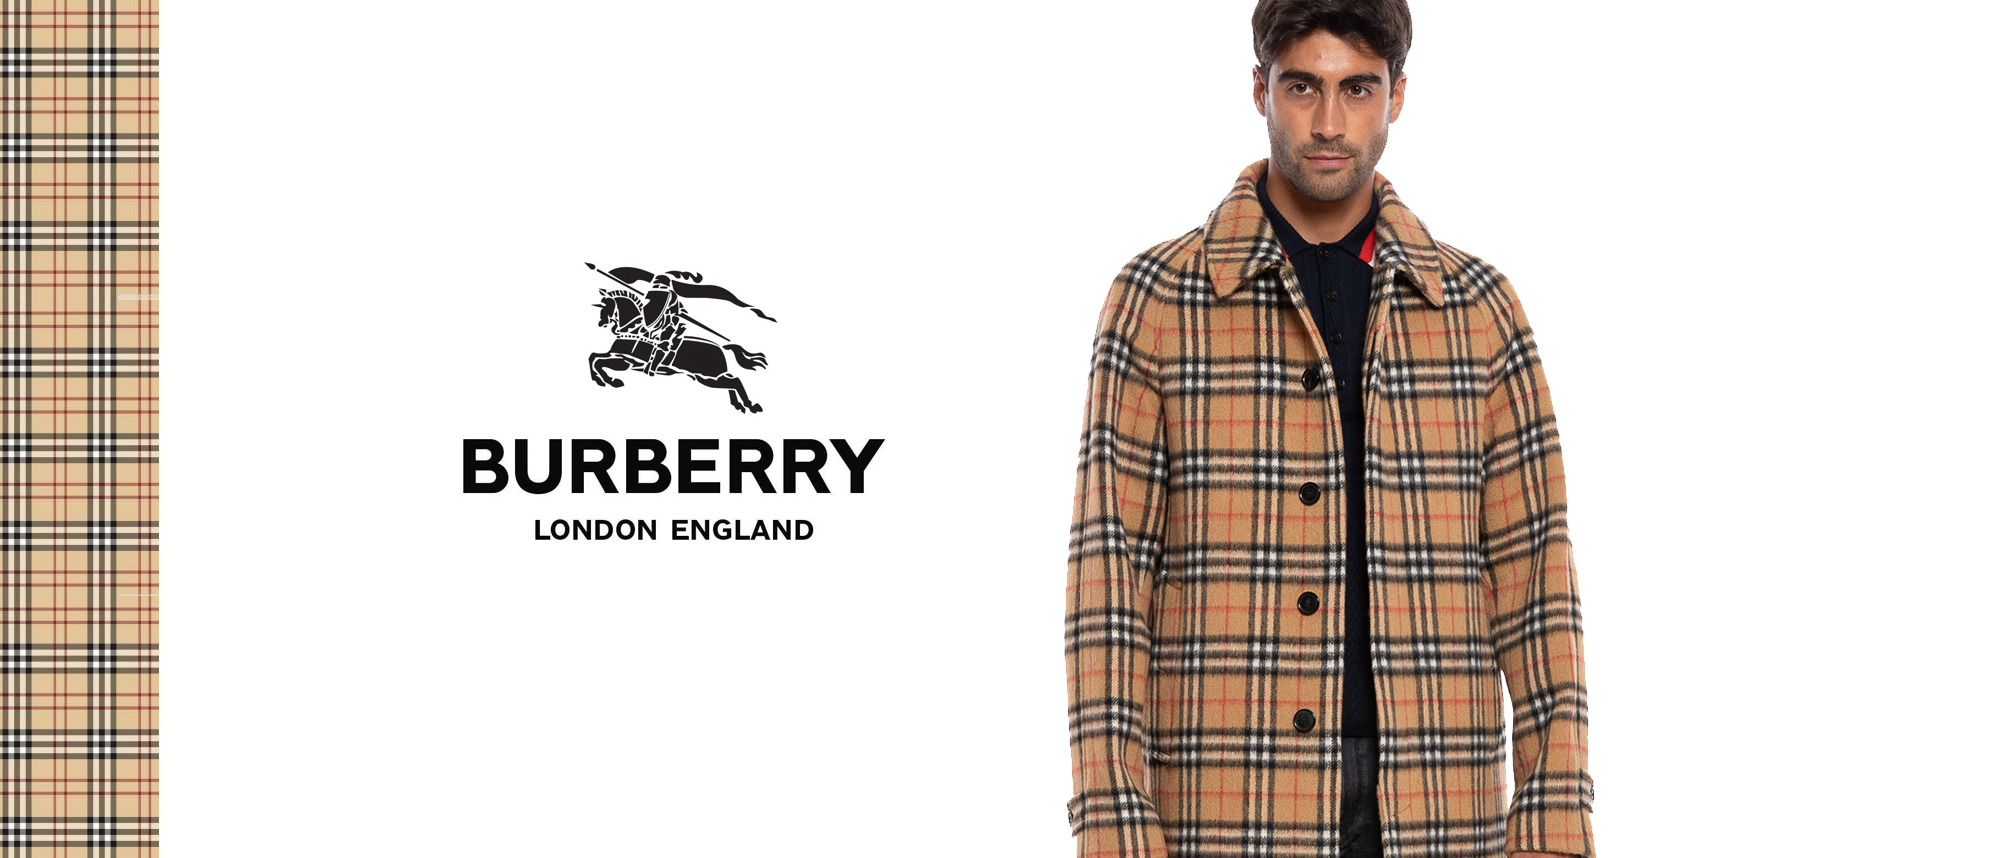 Burberry a tradition of craftsmanship, design and innovation - Luxgentleman